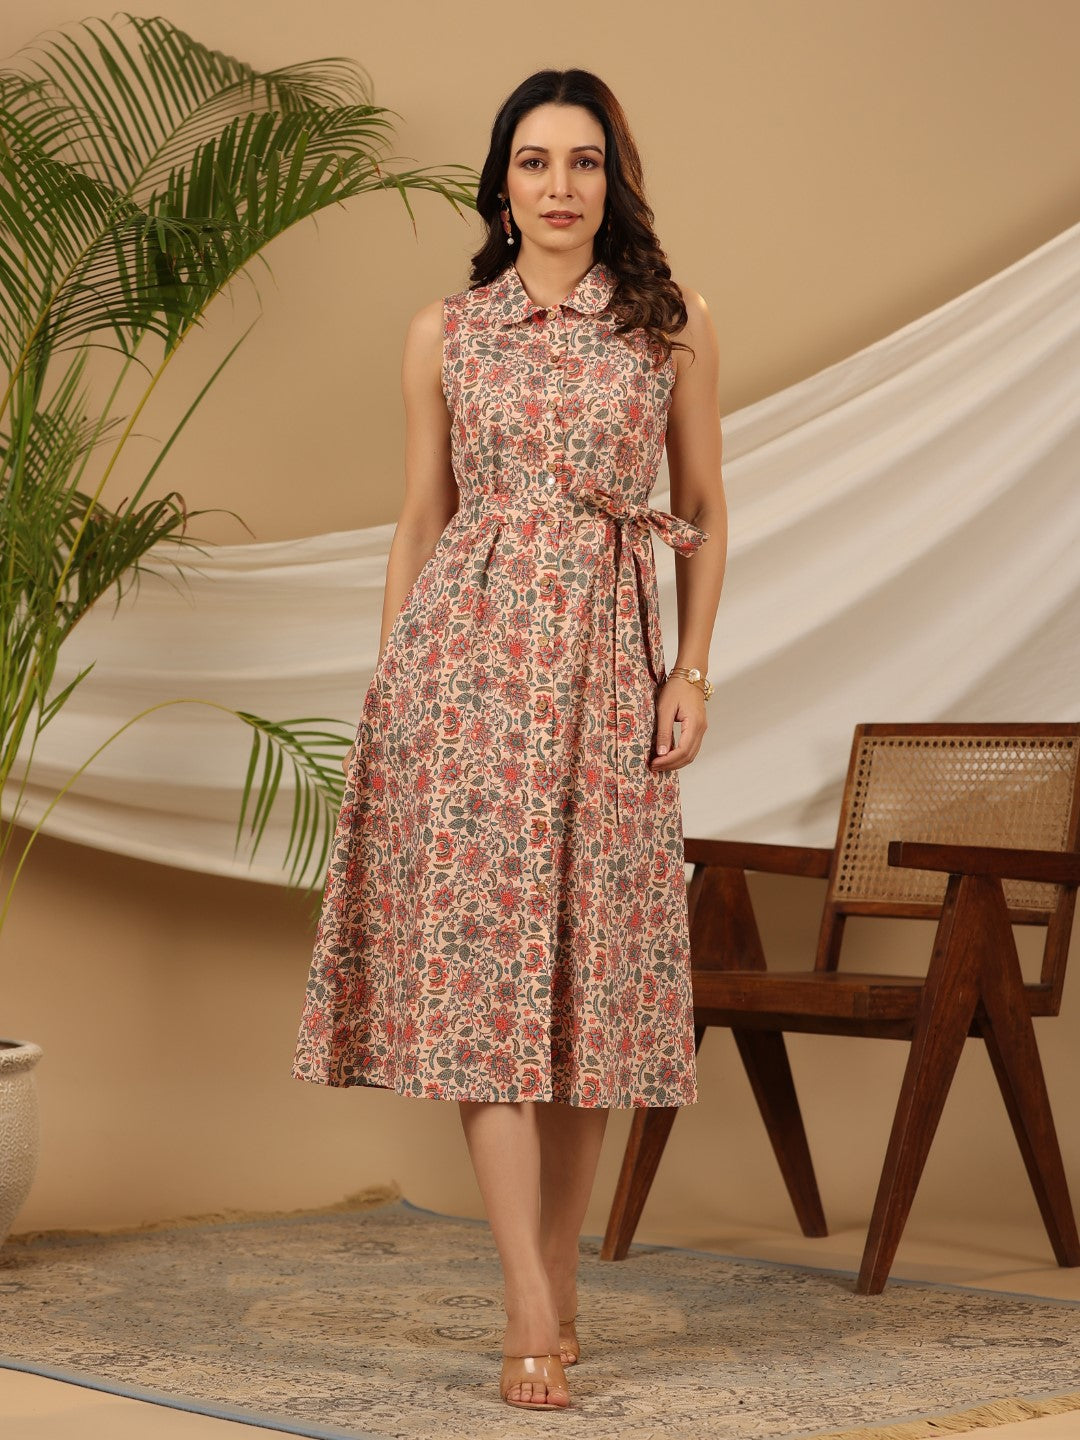 Women's Frocks in Mumbai at best price by Jesal Garment - Justdial